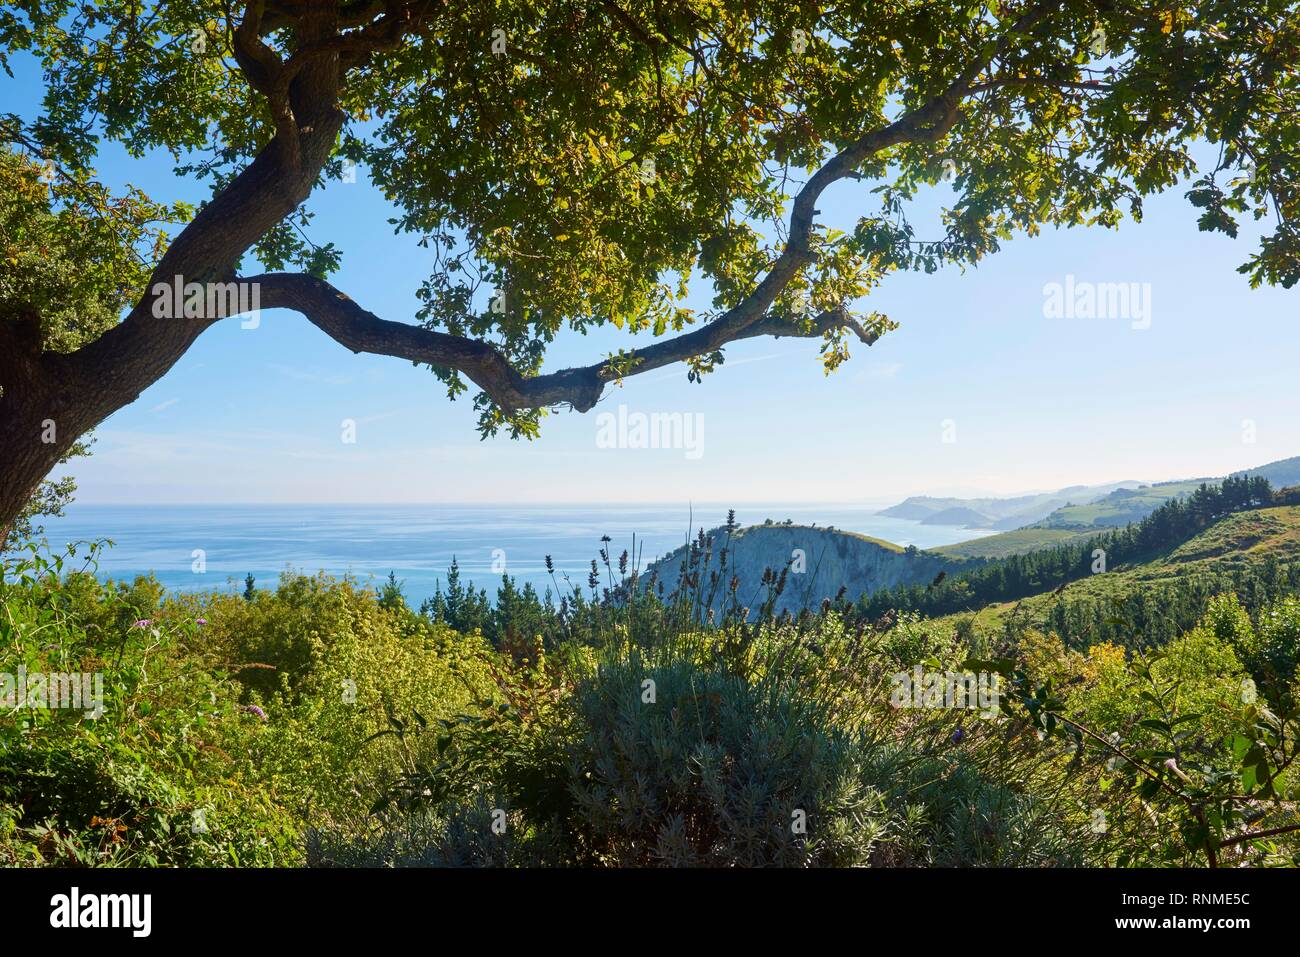 View to the geopark Costa Vasca at the the atlantic ocean between trees next to the Camino del Norte on the way to Deba, coastal path, Way of St. Jame Stock Photo